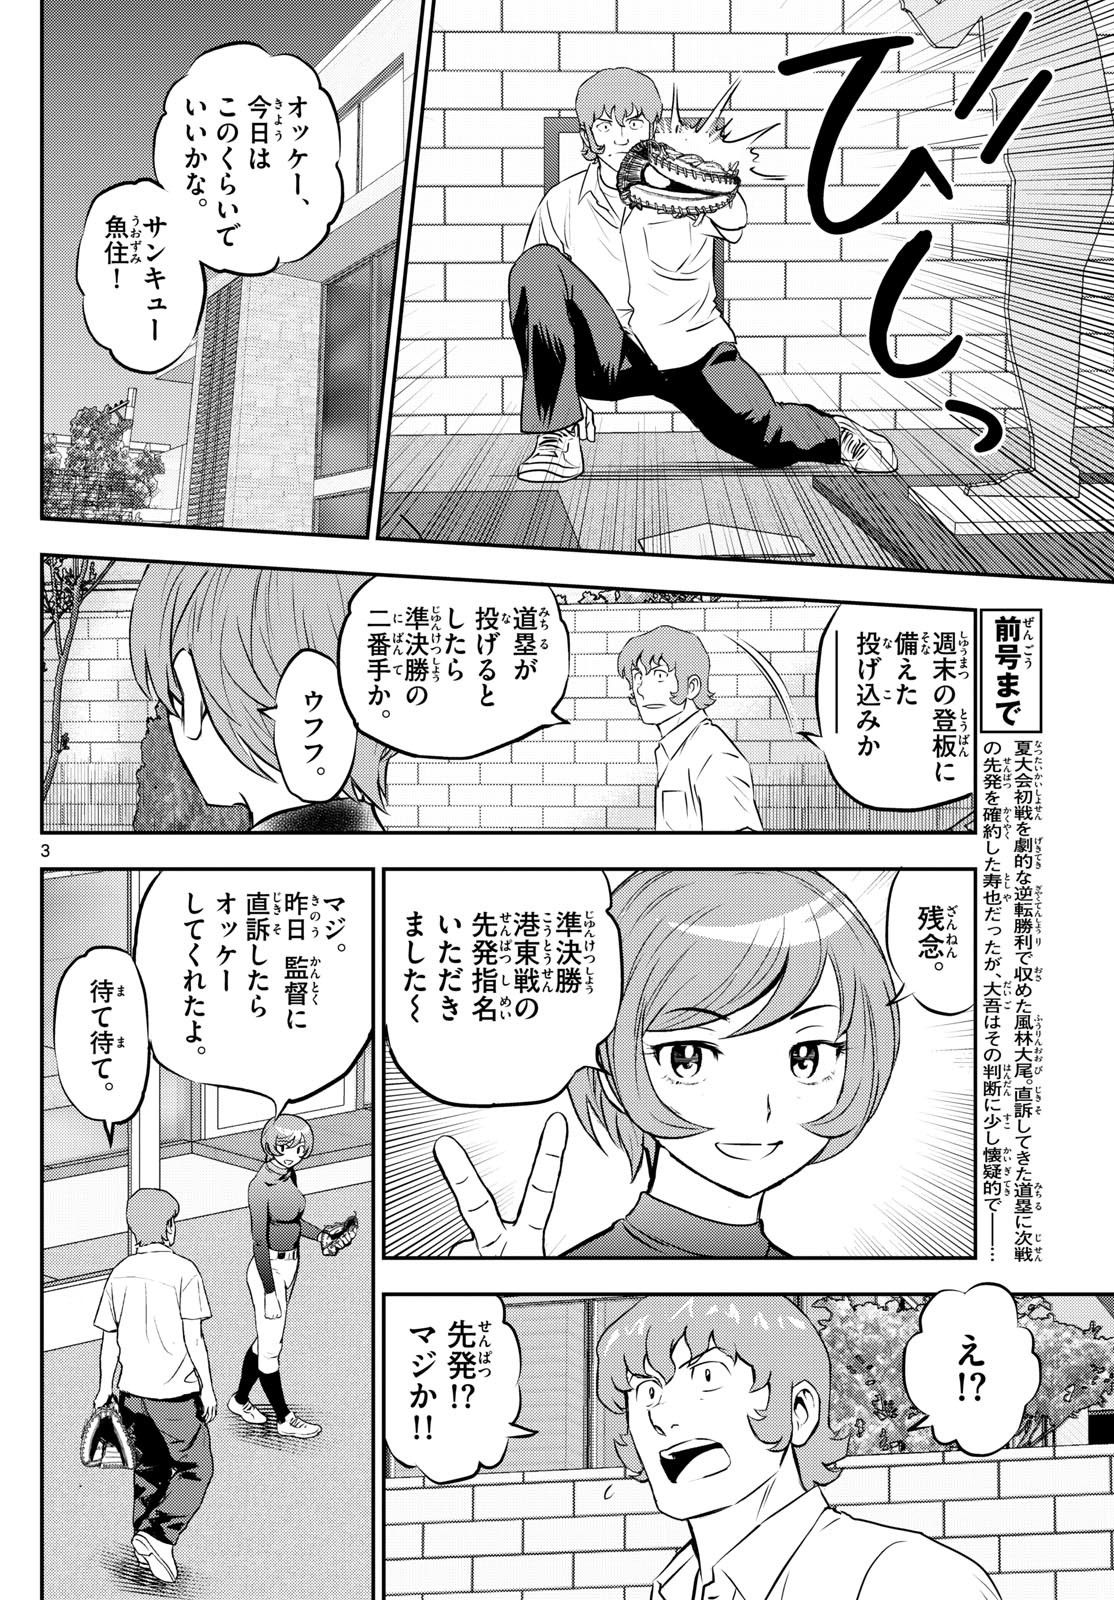 Major 2nd - メジャーセカンド - Chapter 279 - Page 4